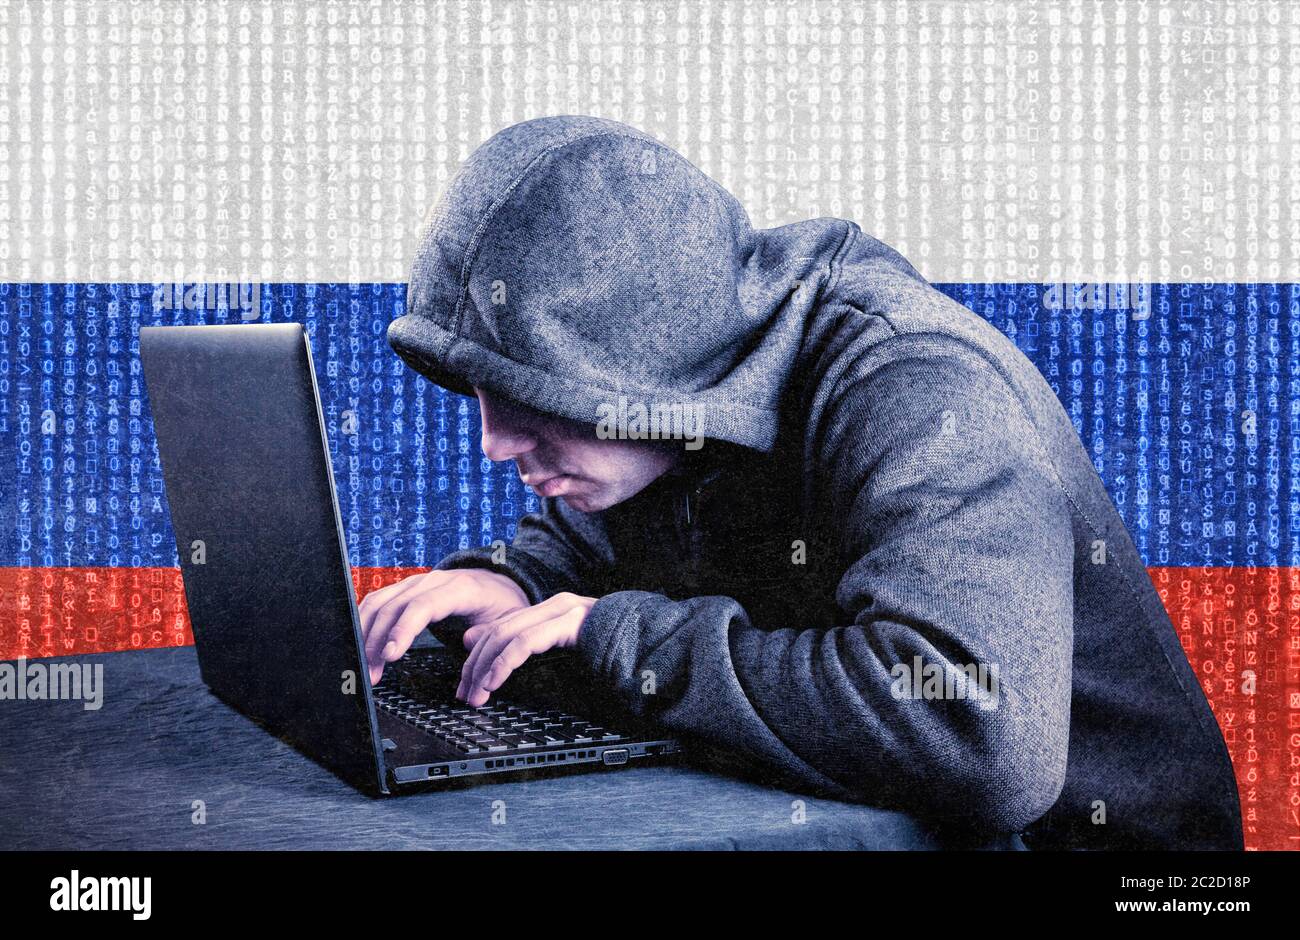 Russian hooded computer hacker with laptop Stock Photo